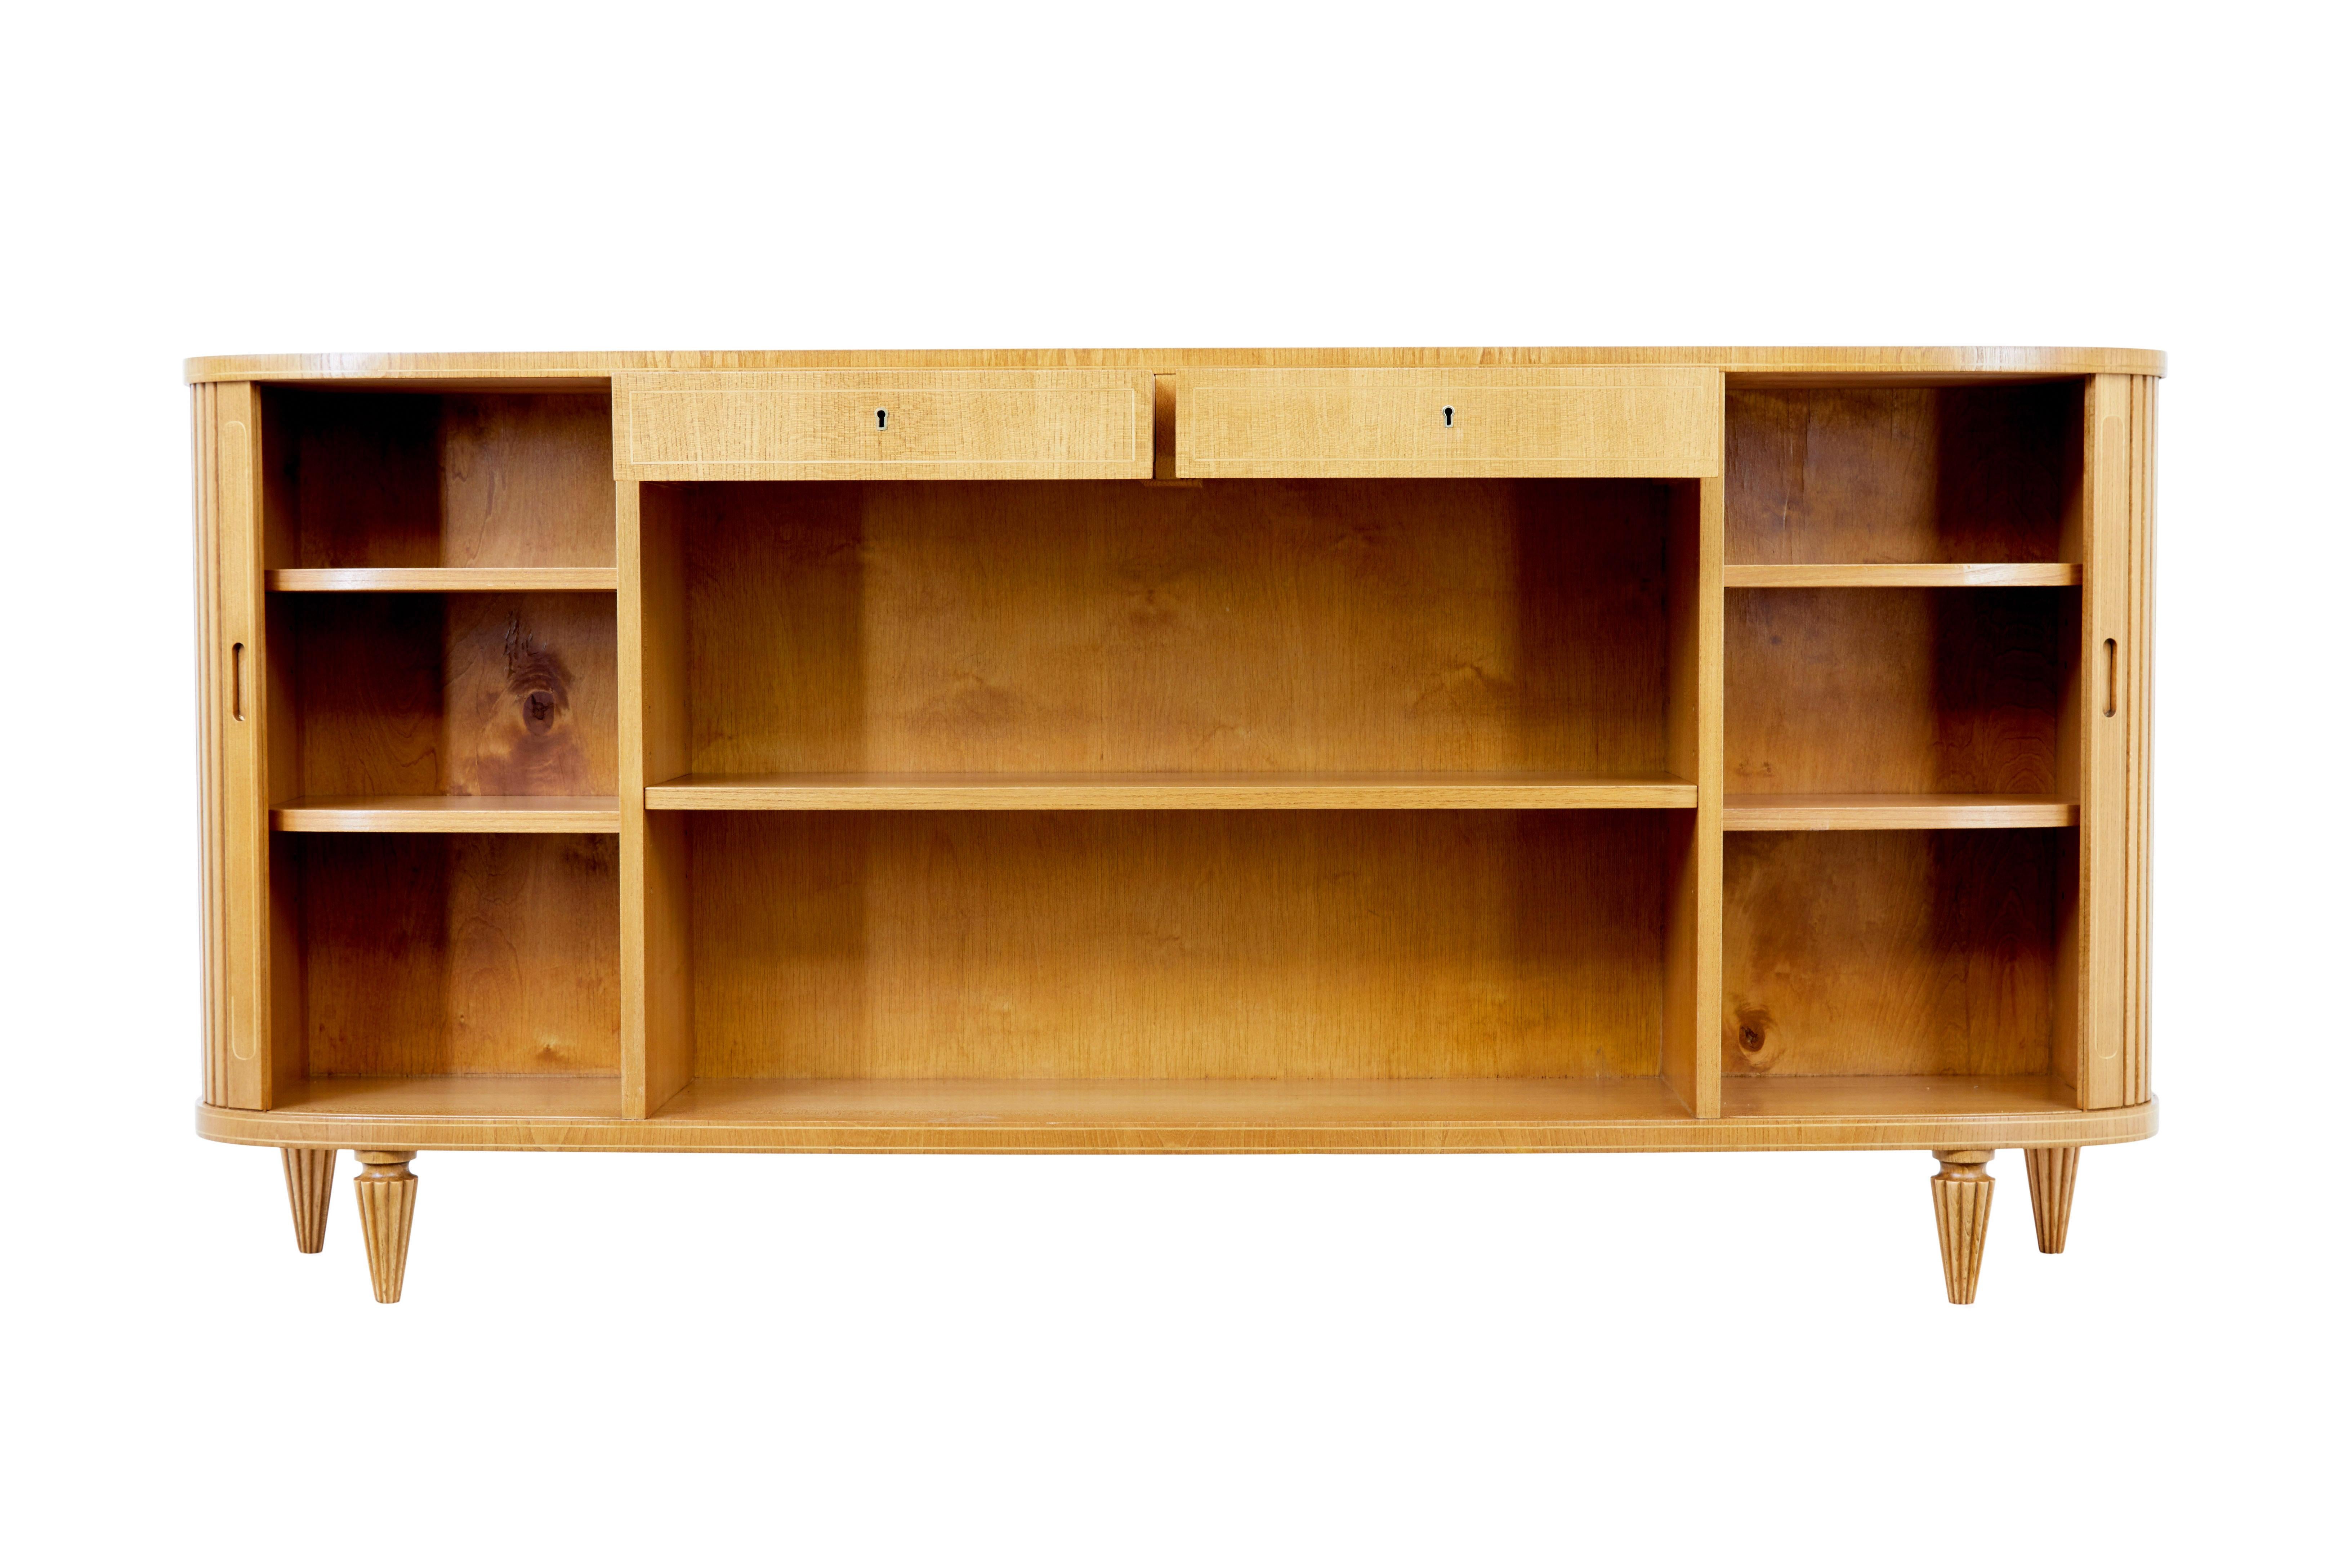 Swedish mid 20th century elm tambour front low open bookcase circa 1950.

We are pleased to offer this fine piece of scandinavian design which has been fully restored in our workshop,  with it's generous length and narrow depth, it provides the